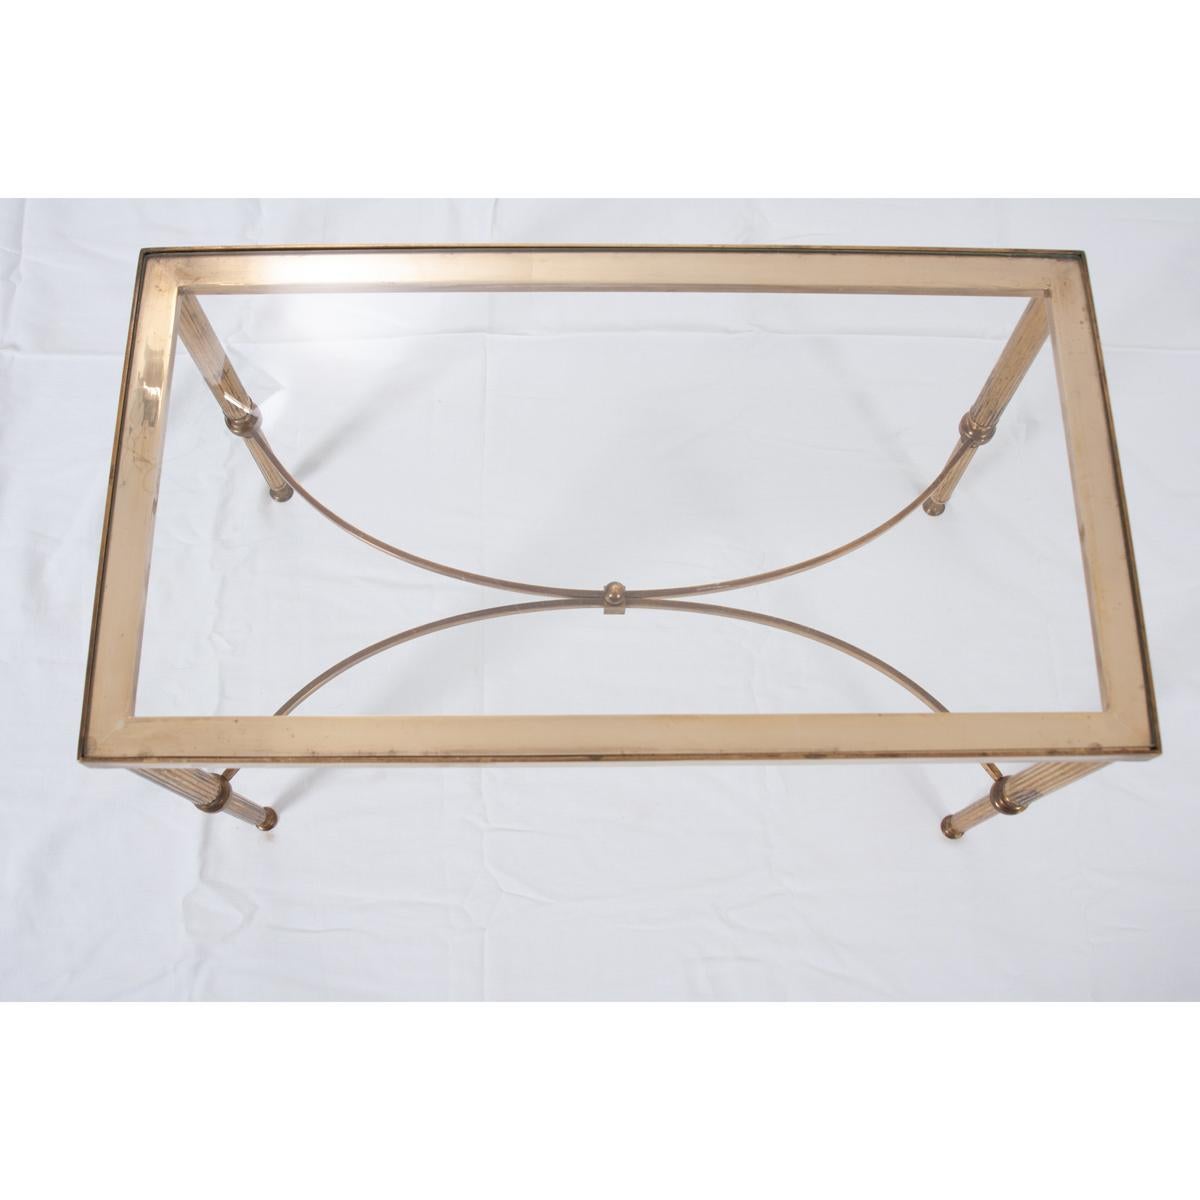 This stylish brass cocktail table or coffee table boasts a clean design that is simply stunning. The delicate brass stretchers form a soft, sweeping X with a brass finial in the center. The thin brass legs are reeded with trumpet-like feet.